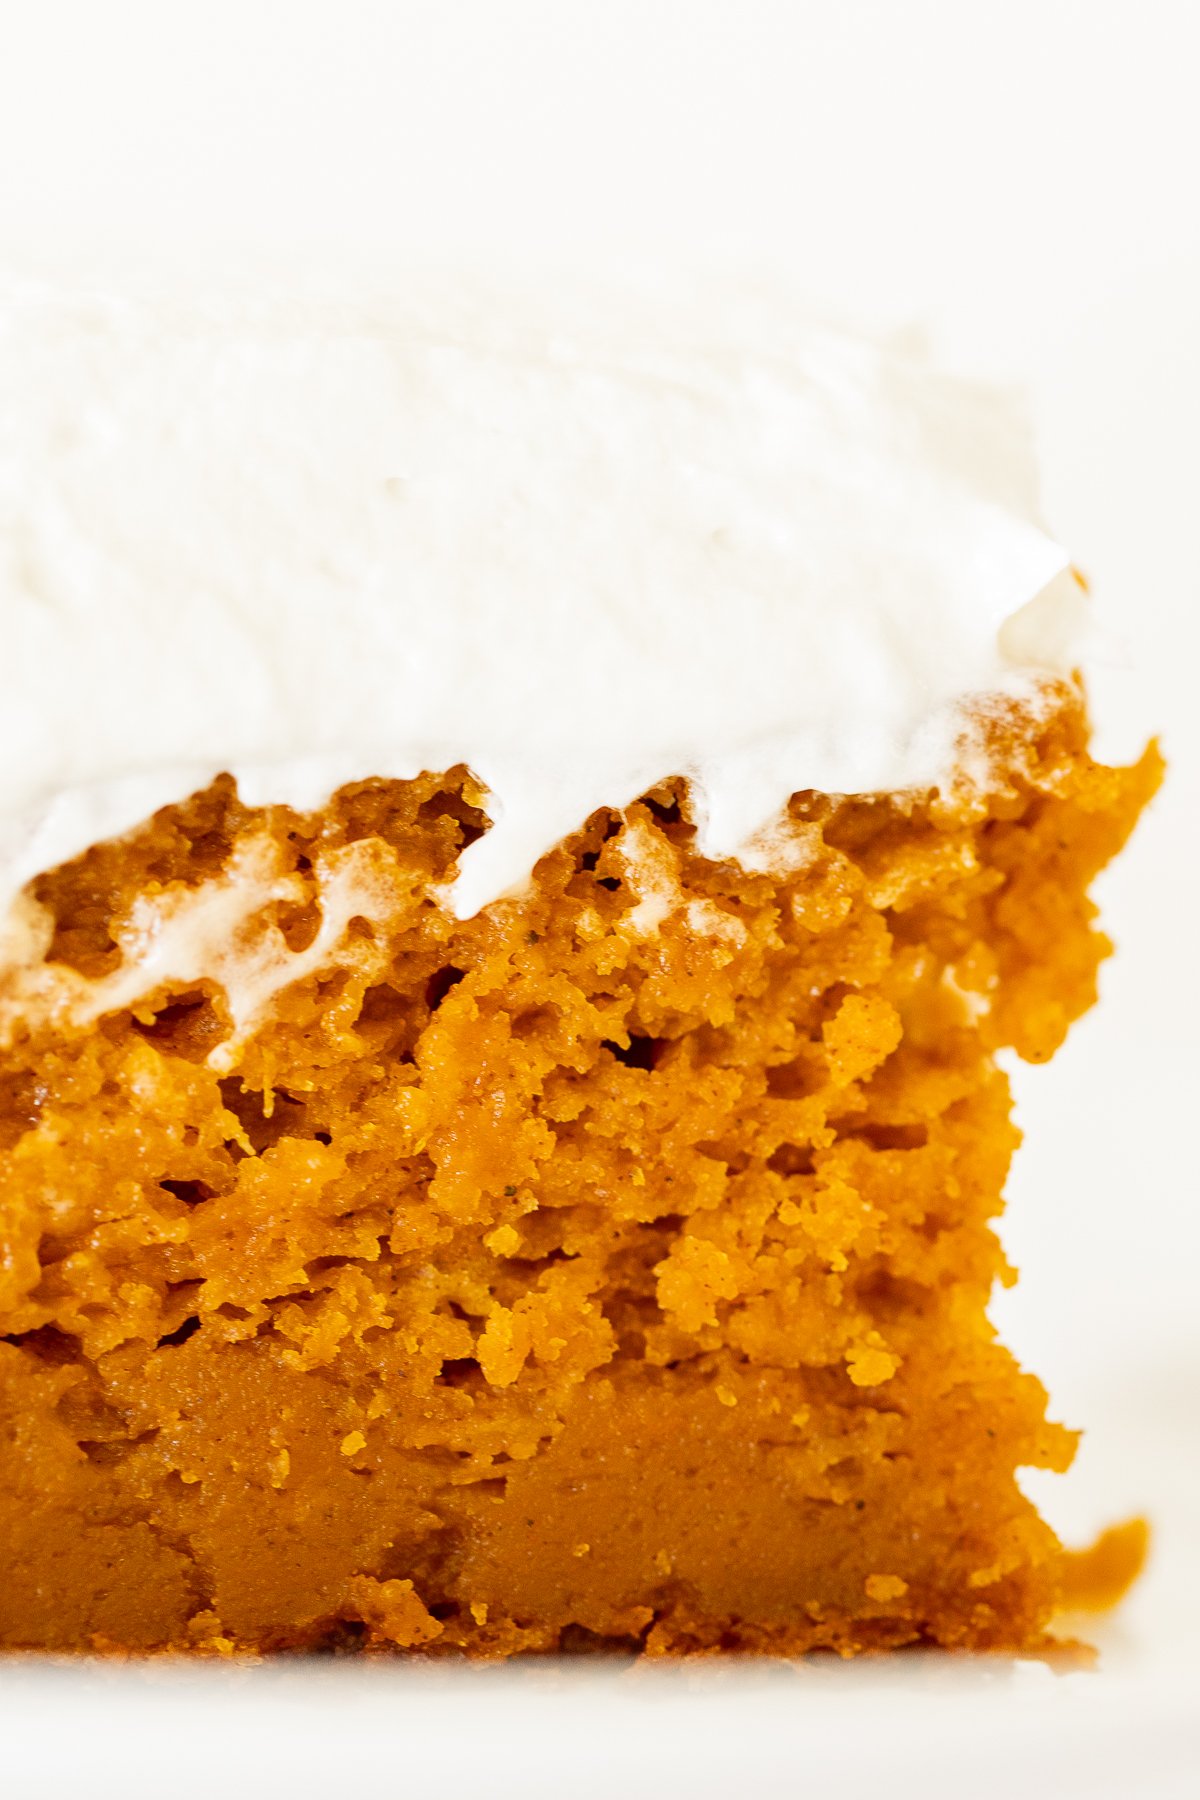 A piece of pumpkin cake with cream cheese frosting on a plate.